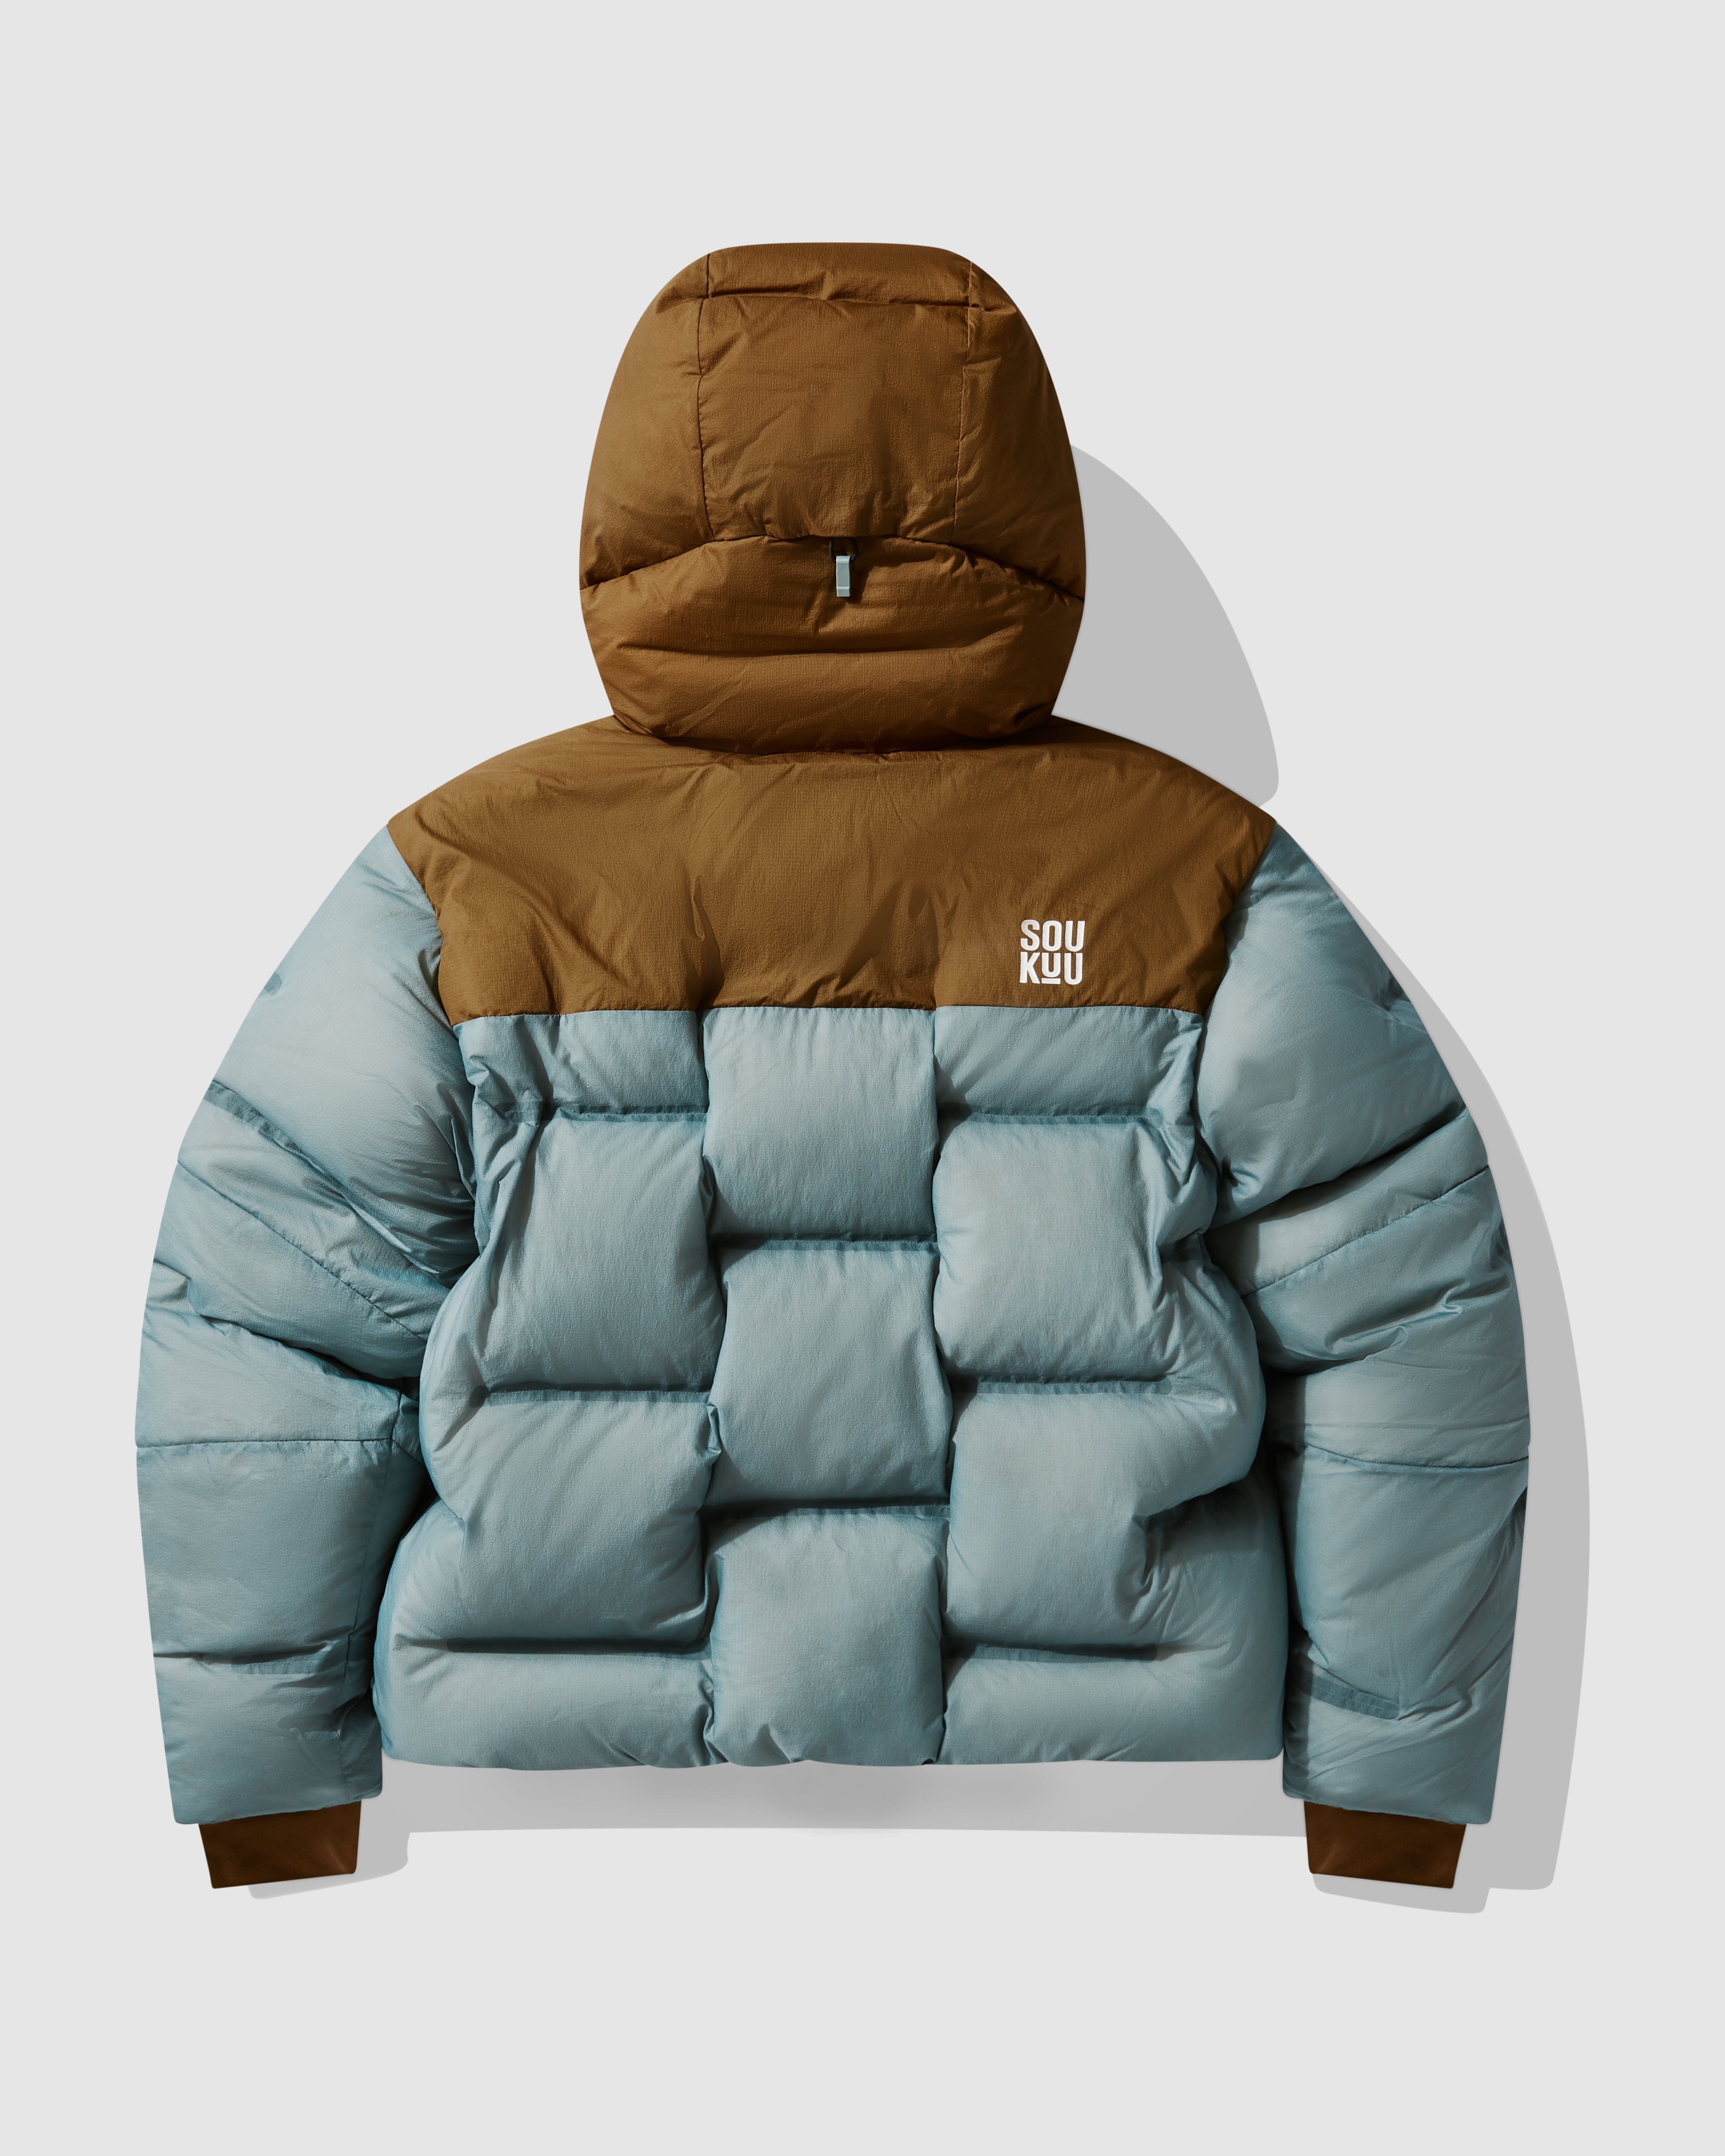 SOUKUU by The North Face X Undercover | DSM London